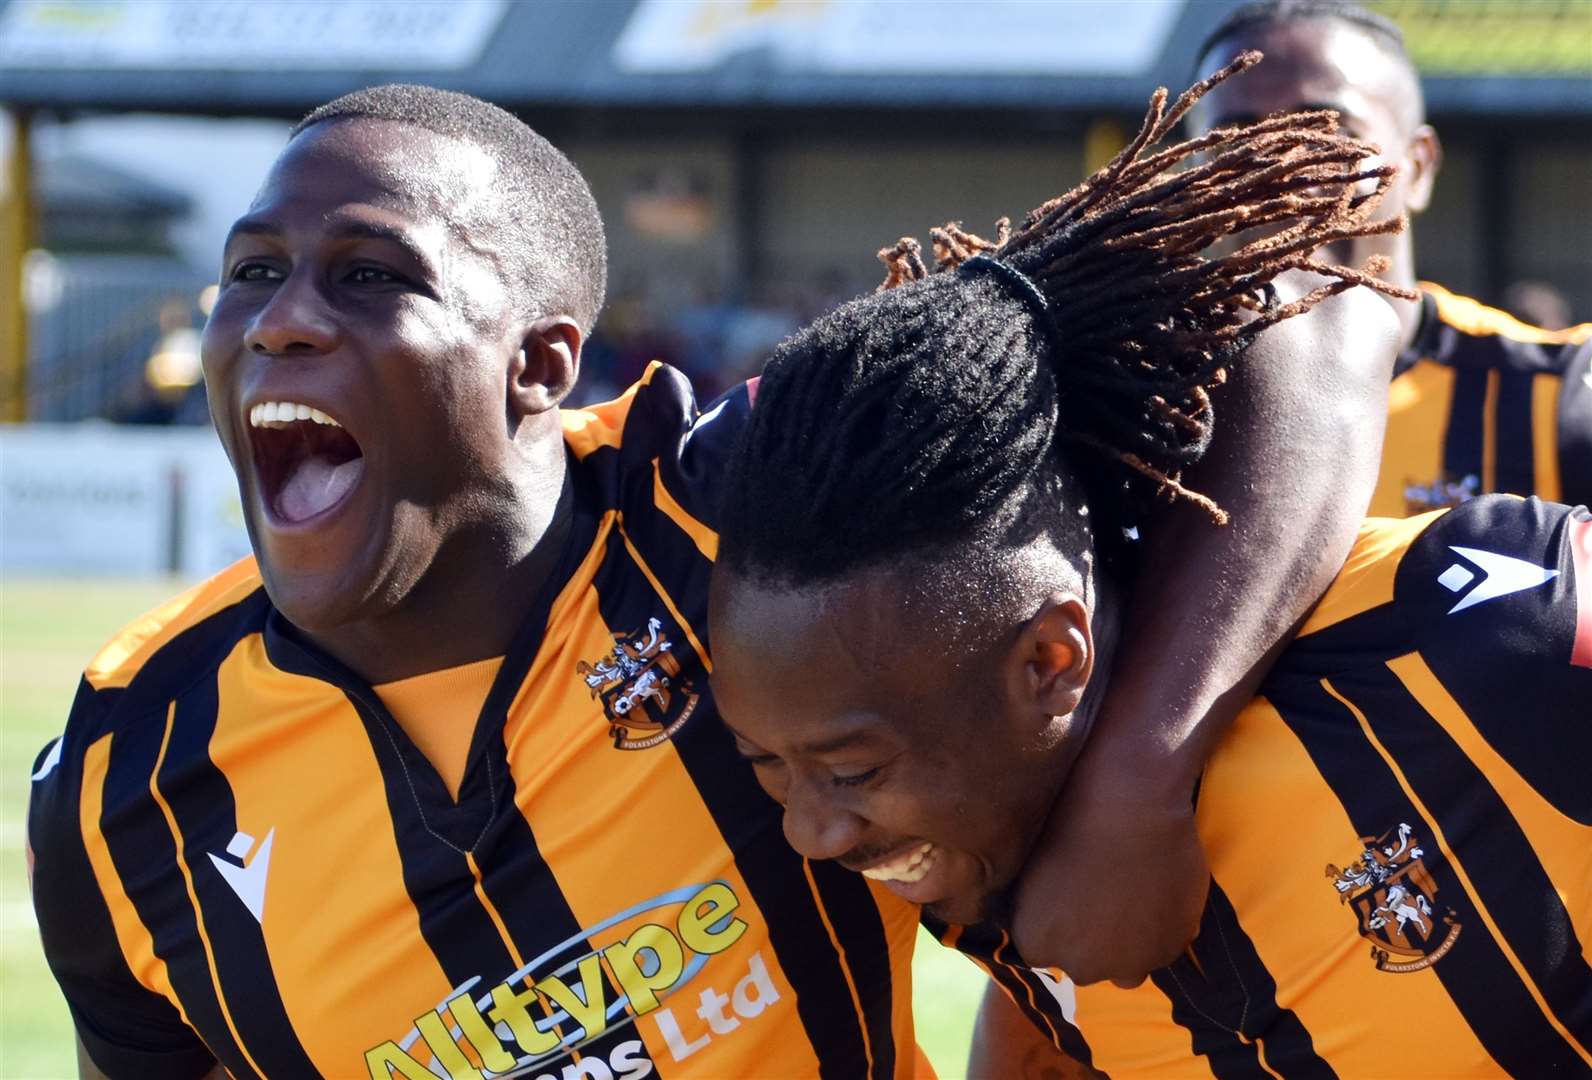 Folkestone's Ade Yusuff, left, scored twice in their midweek league defeat to Cray Wanderers. Picture: Randolph File